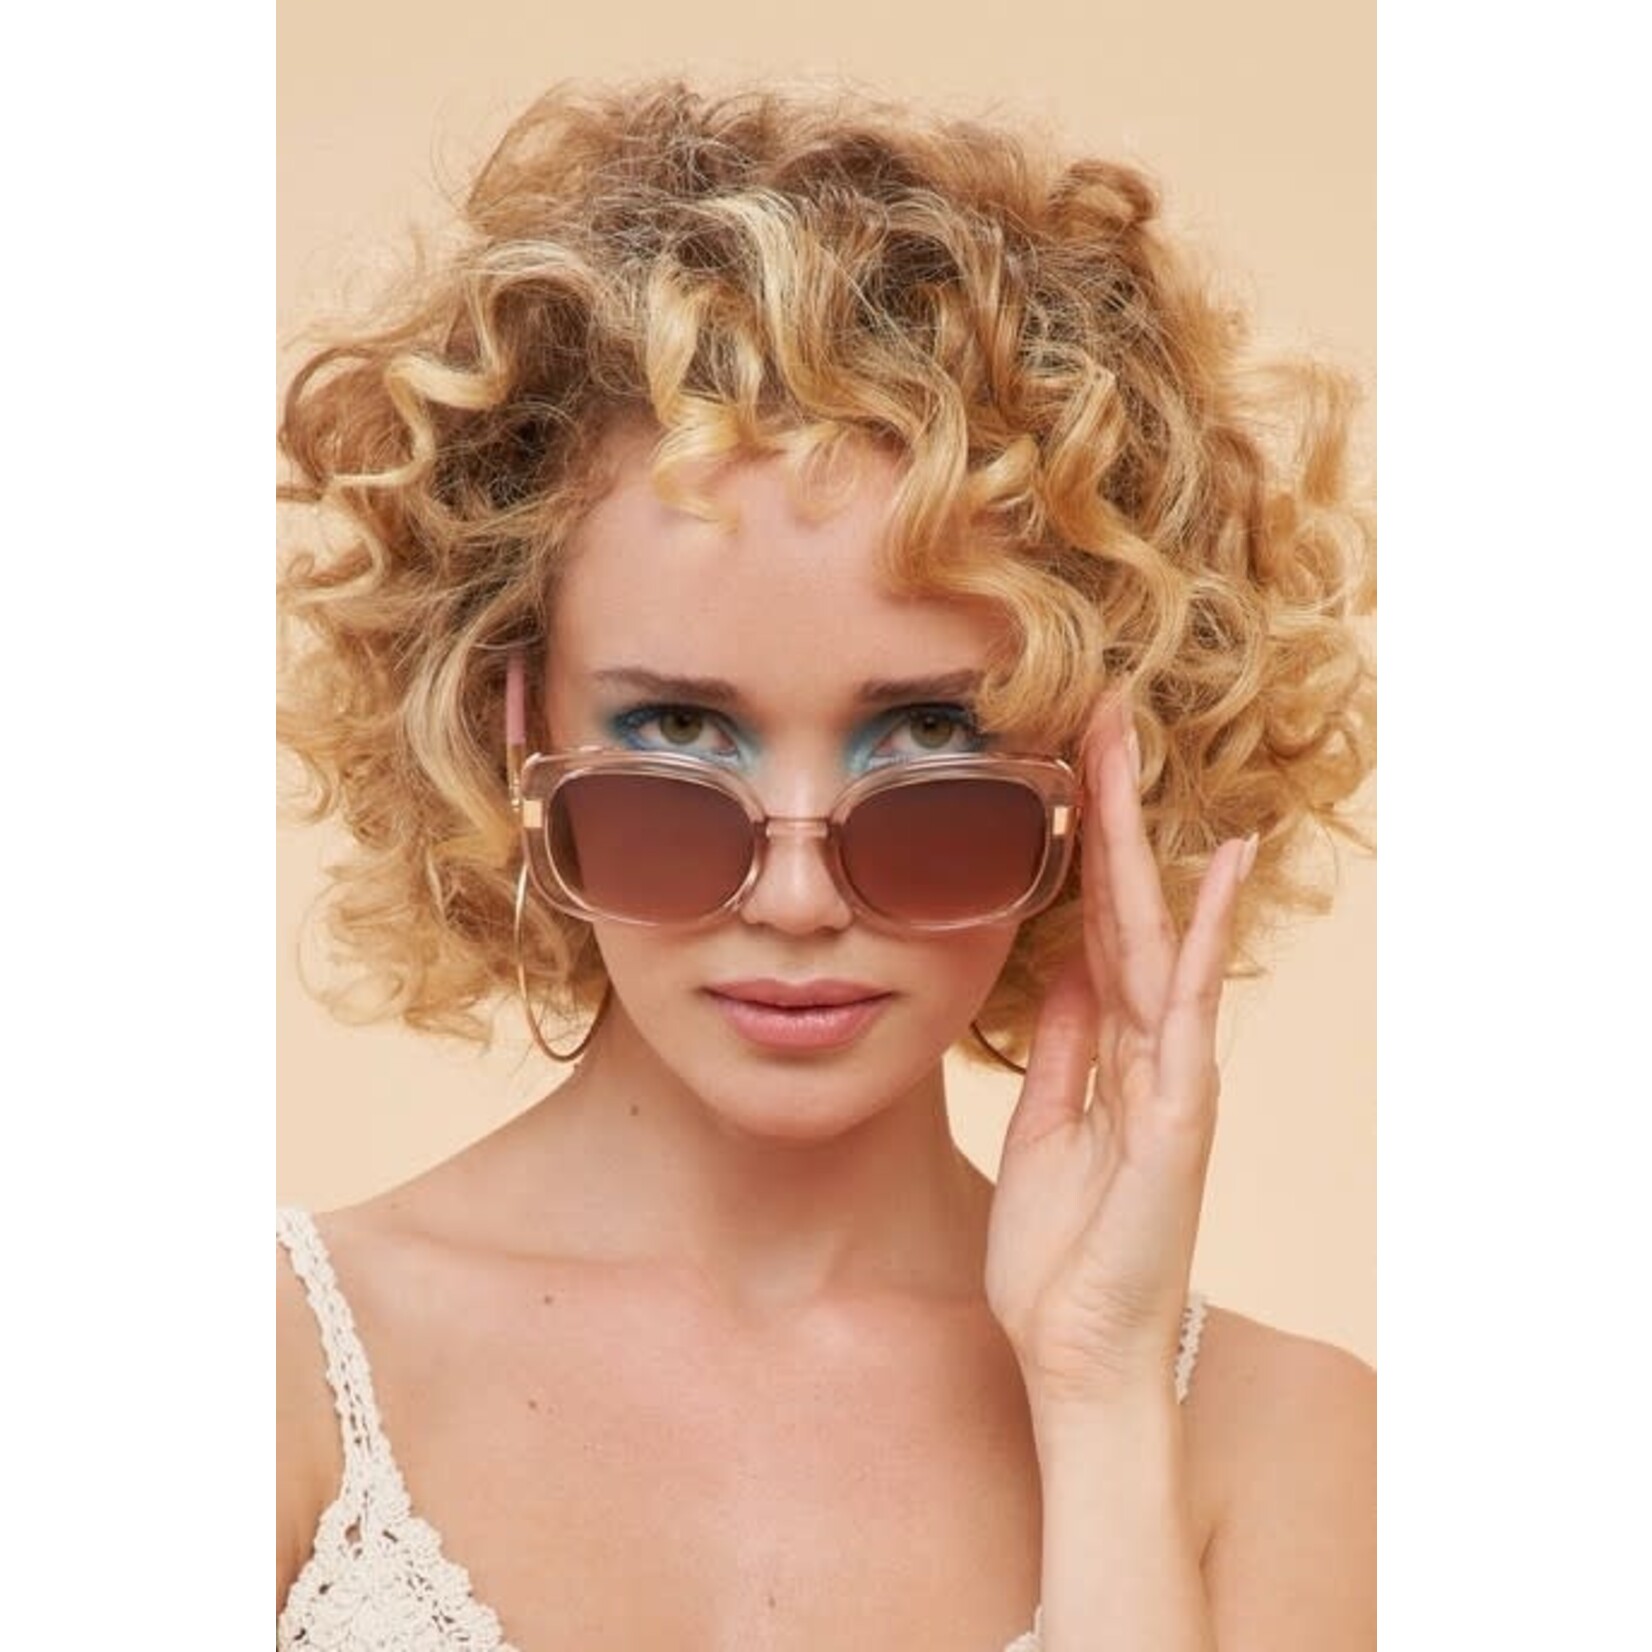 Powder Paige Limited Edition Sunglasses in Rose